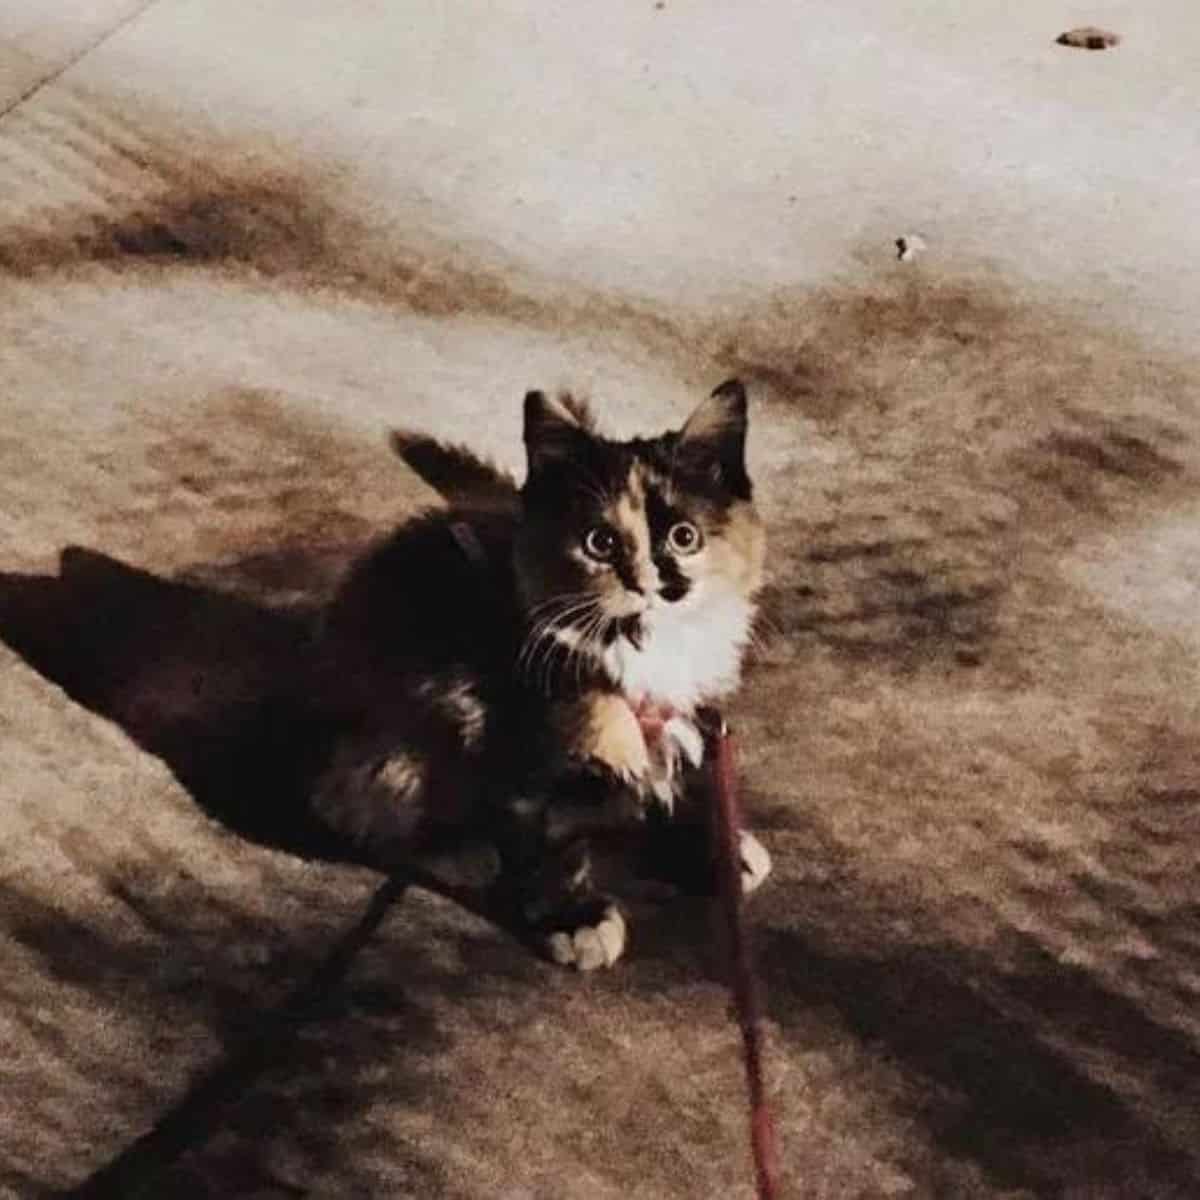 a kitten on a leash is sitting and looking at the camera